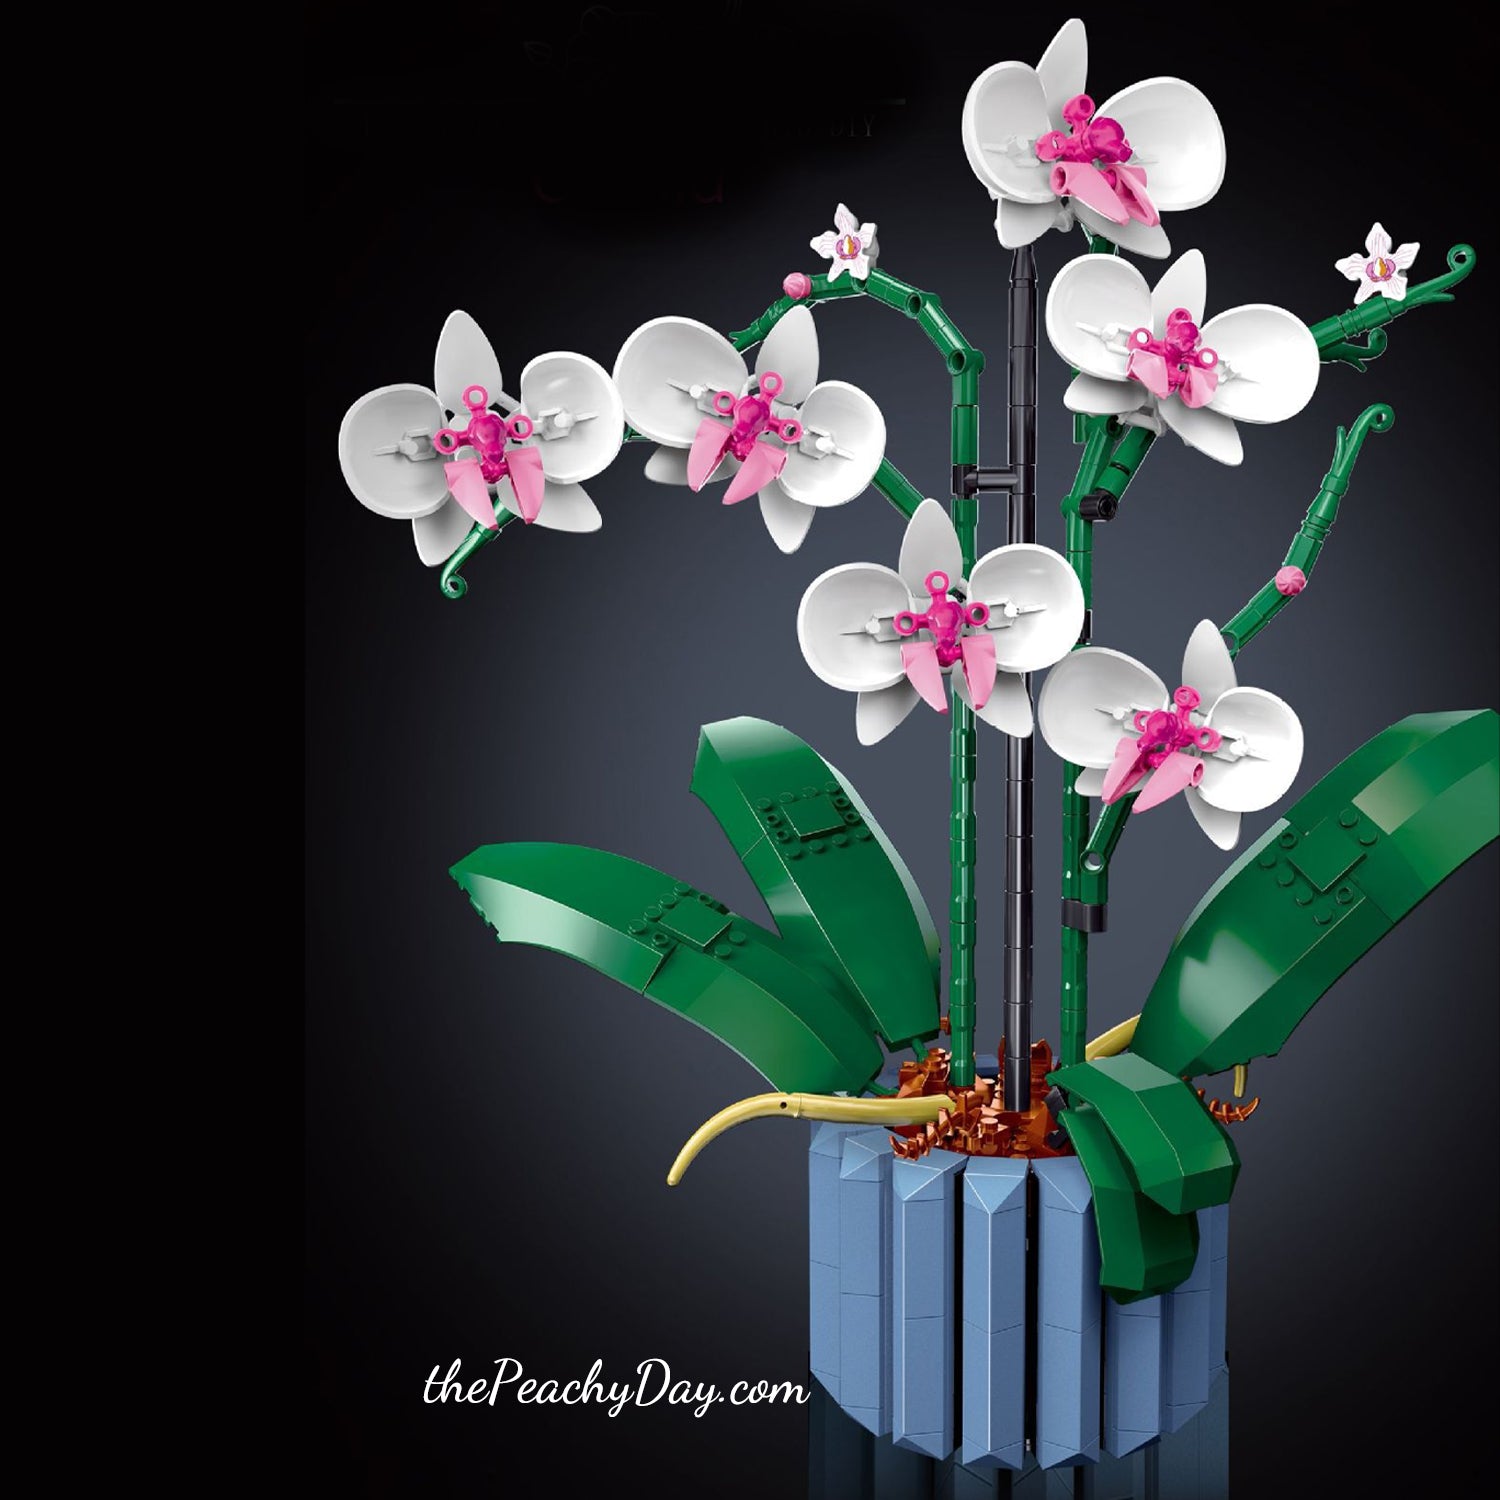 Orchid Botanical Collection Flower Building Set – the Peachy Day